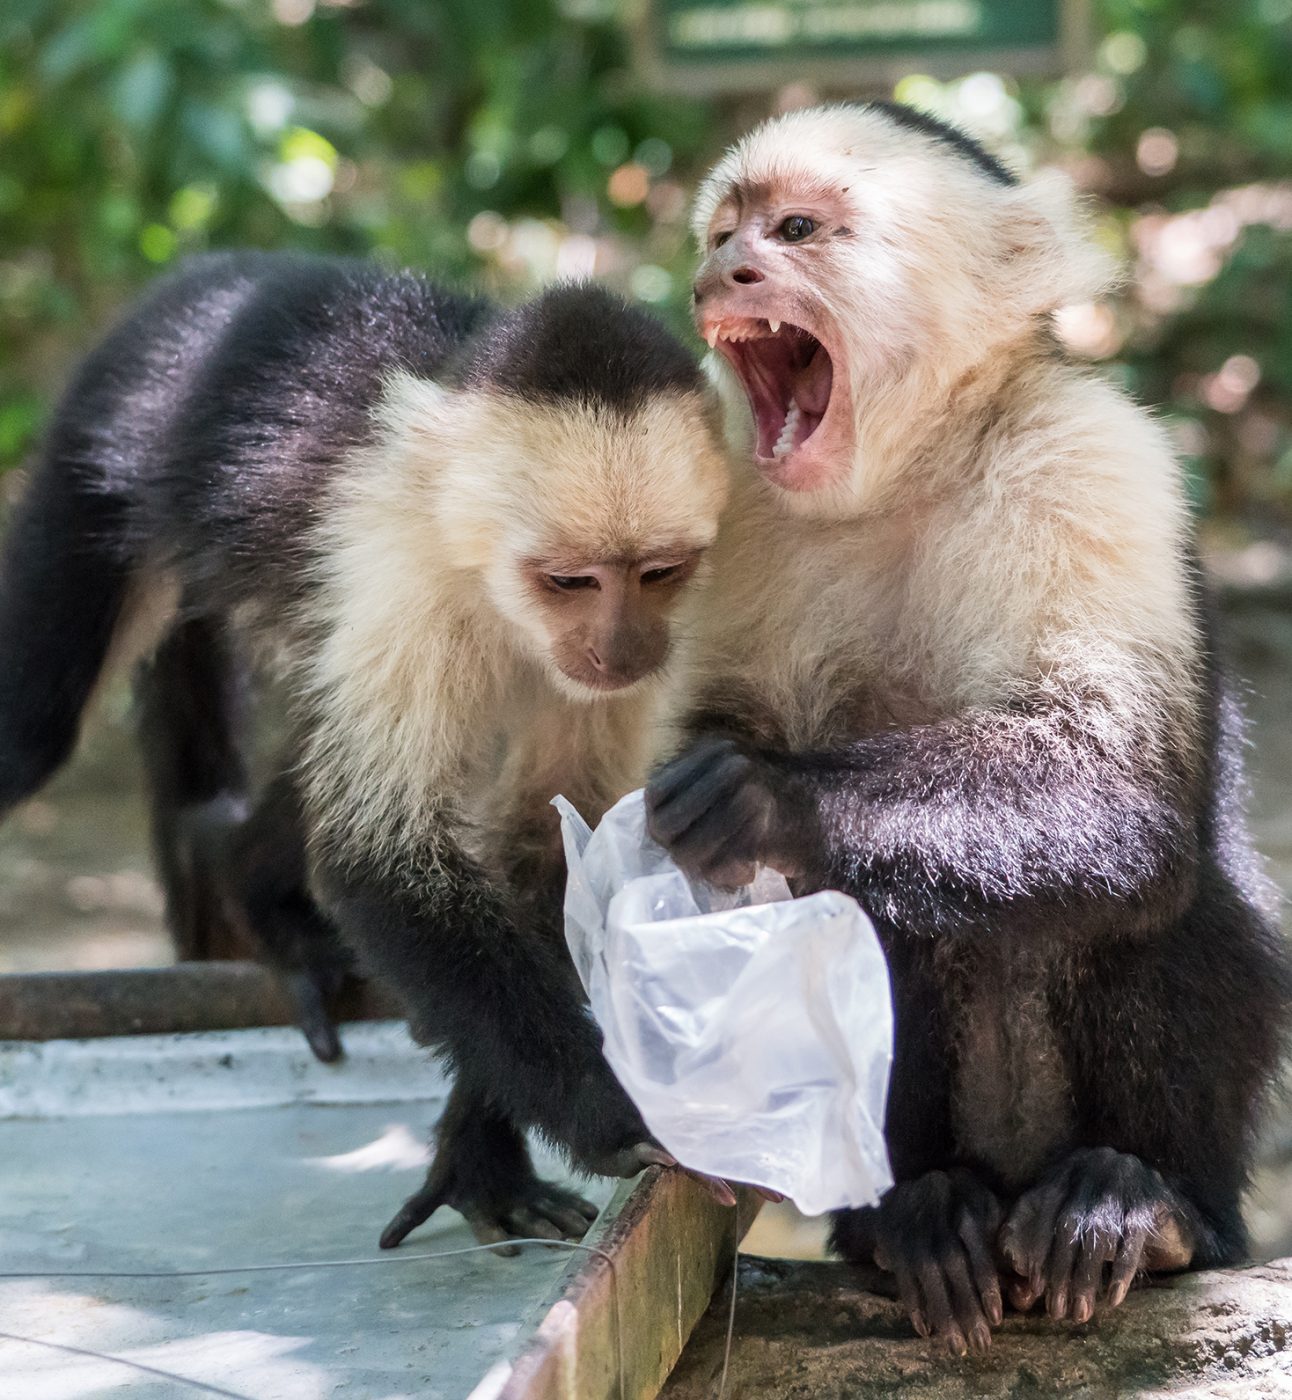 Two white headed capuchin monkeys, one holding a white plastic bag with its mouth open and the other moving towards the bag